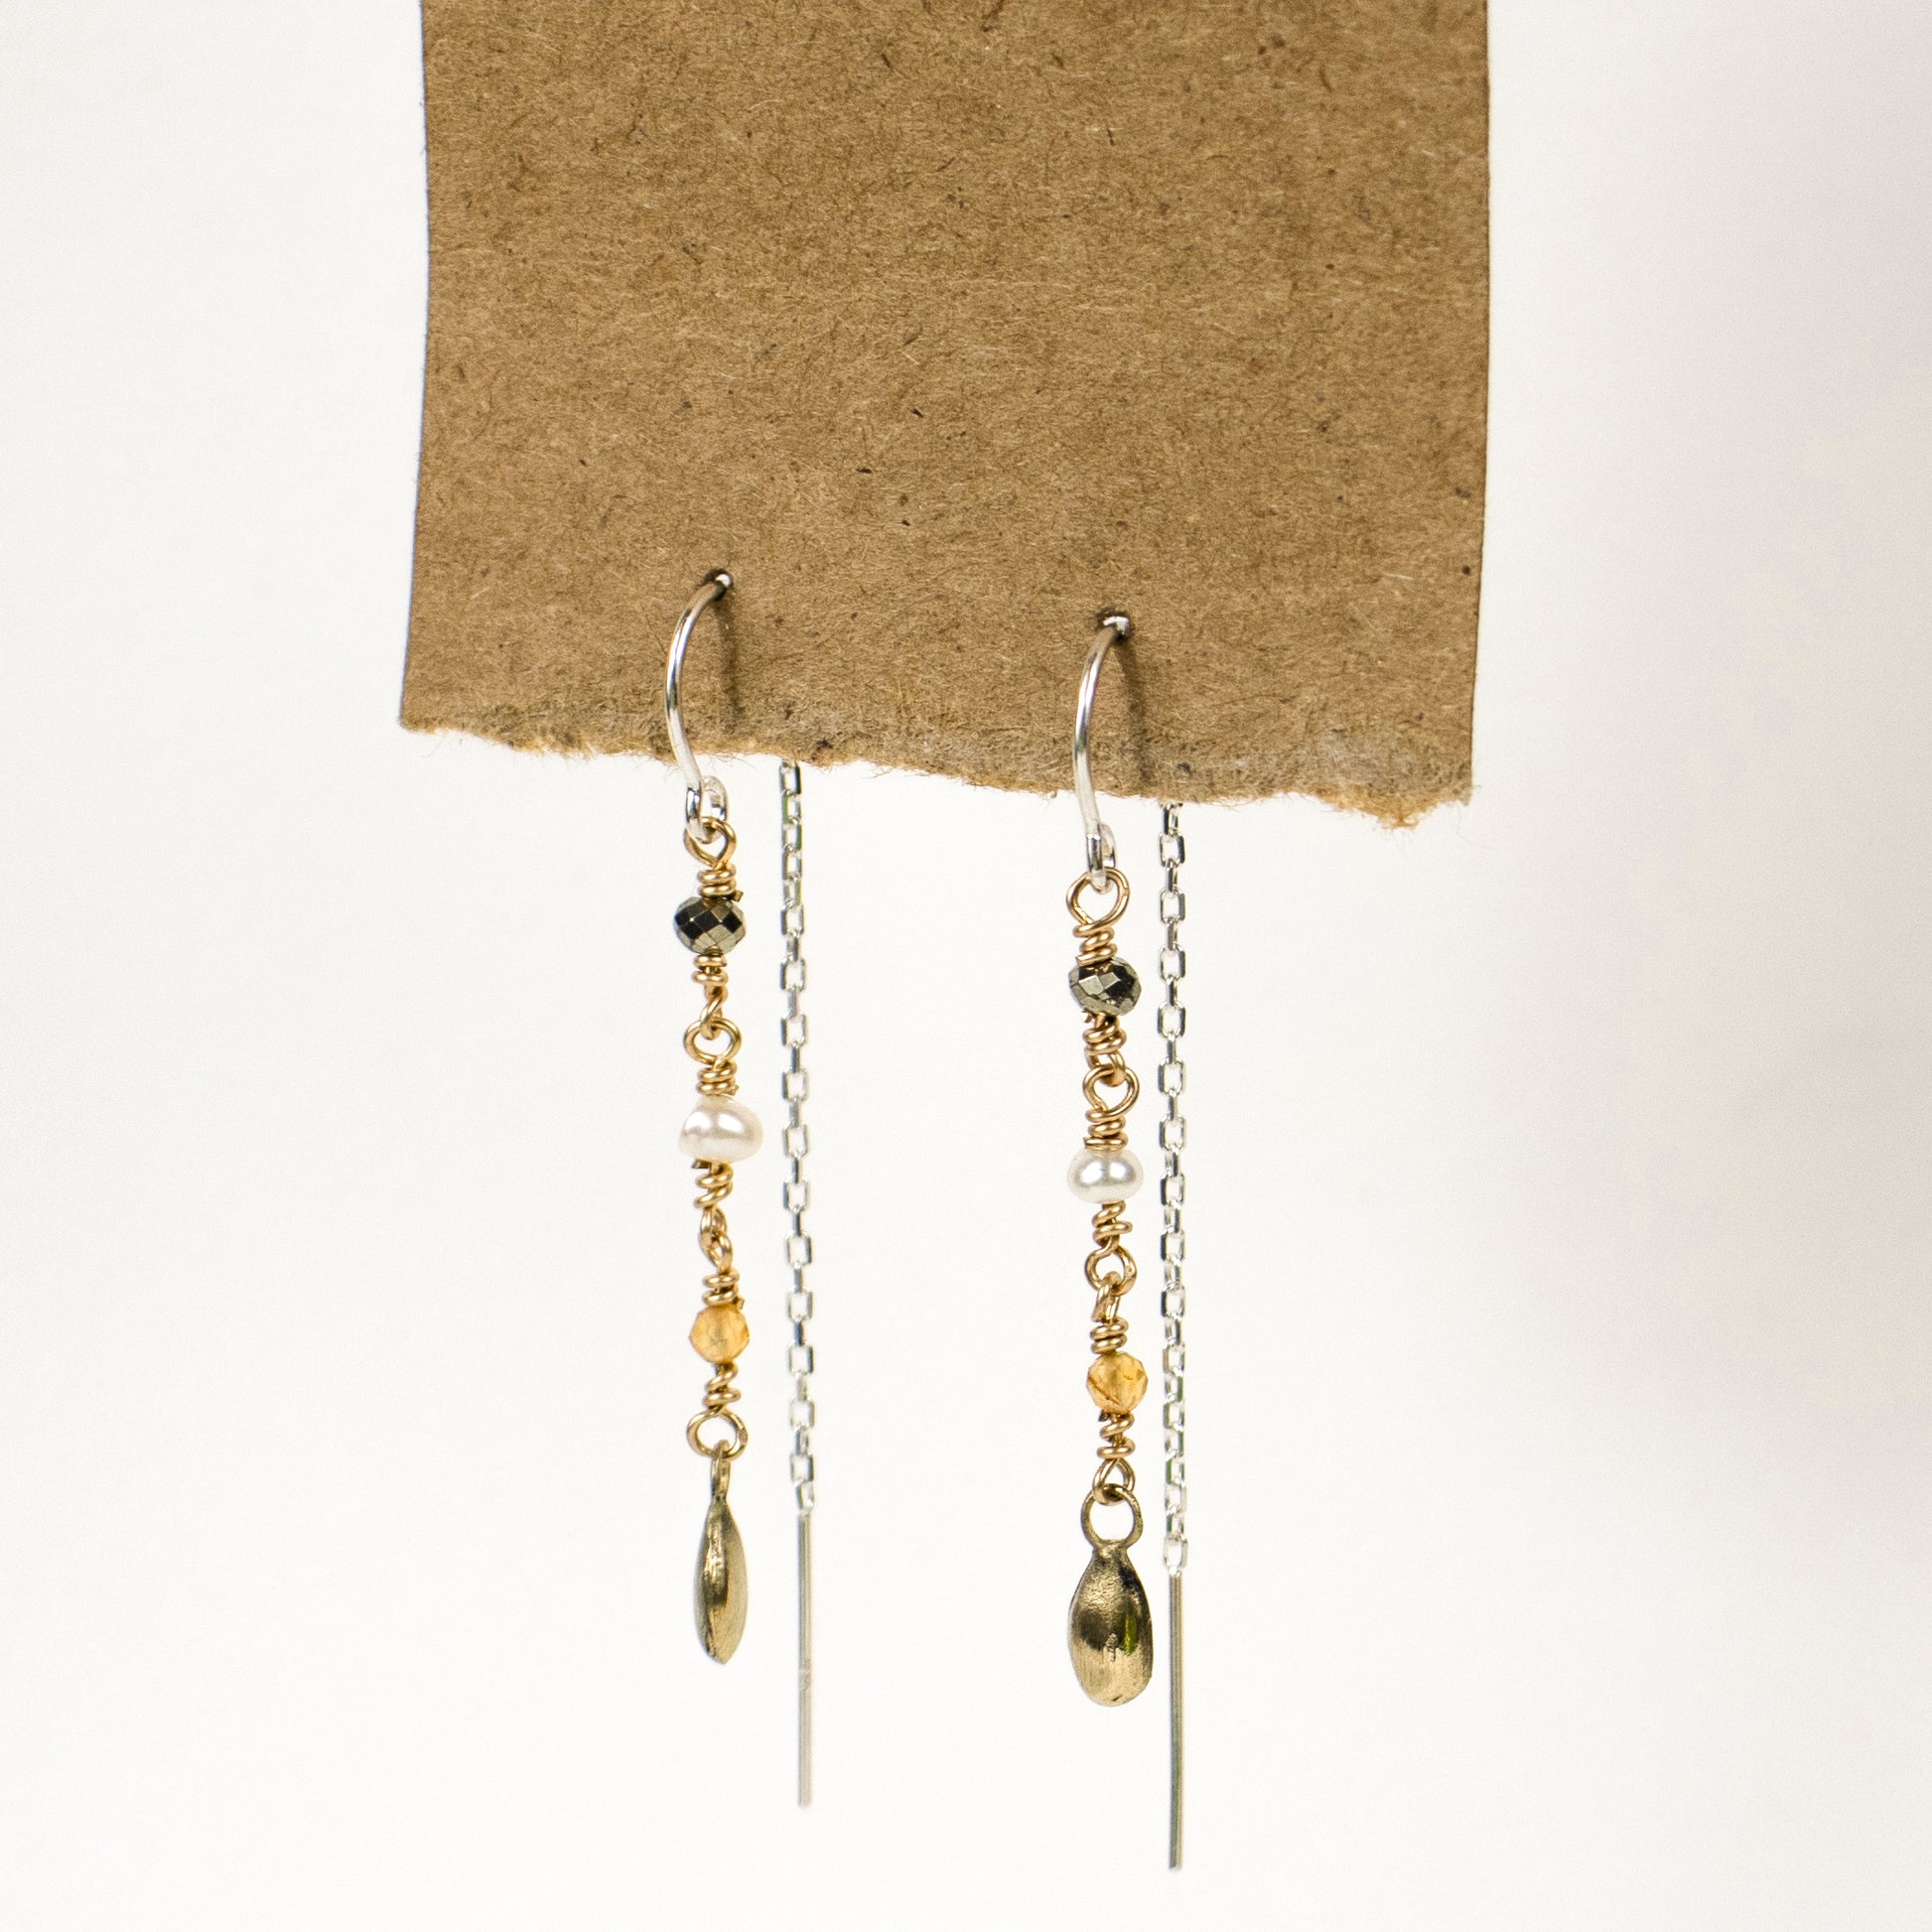 Reclaimed sterling silver and gold-filled wire threader earrings beaded with citrine, pyrite and one freshwater pearl and available with either 10k gold or sterling silver seed charms.